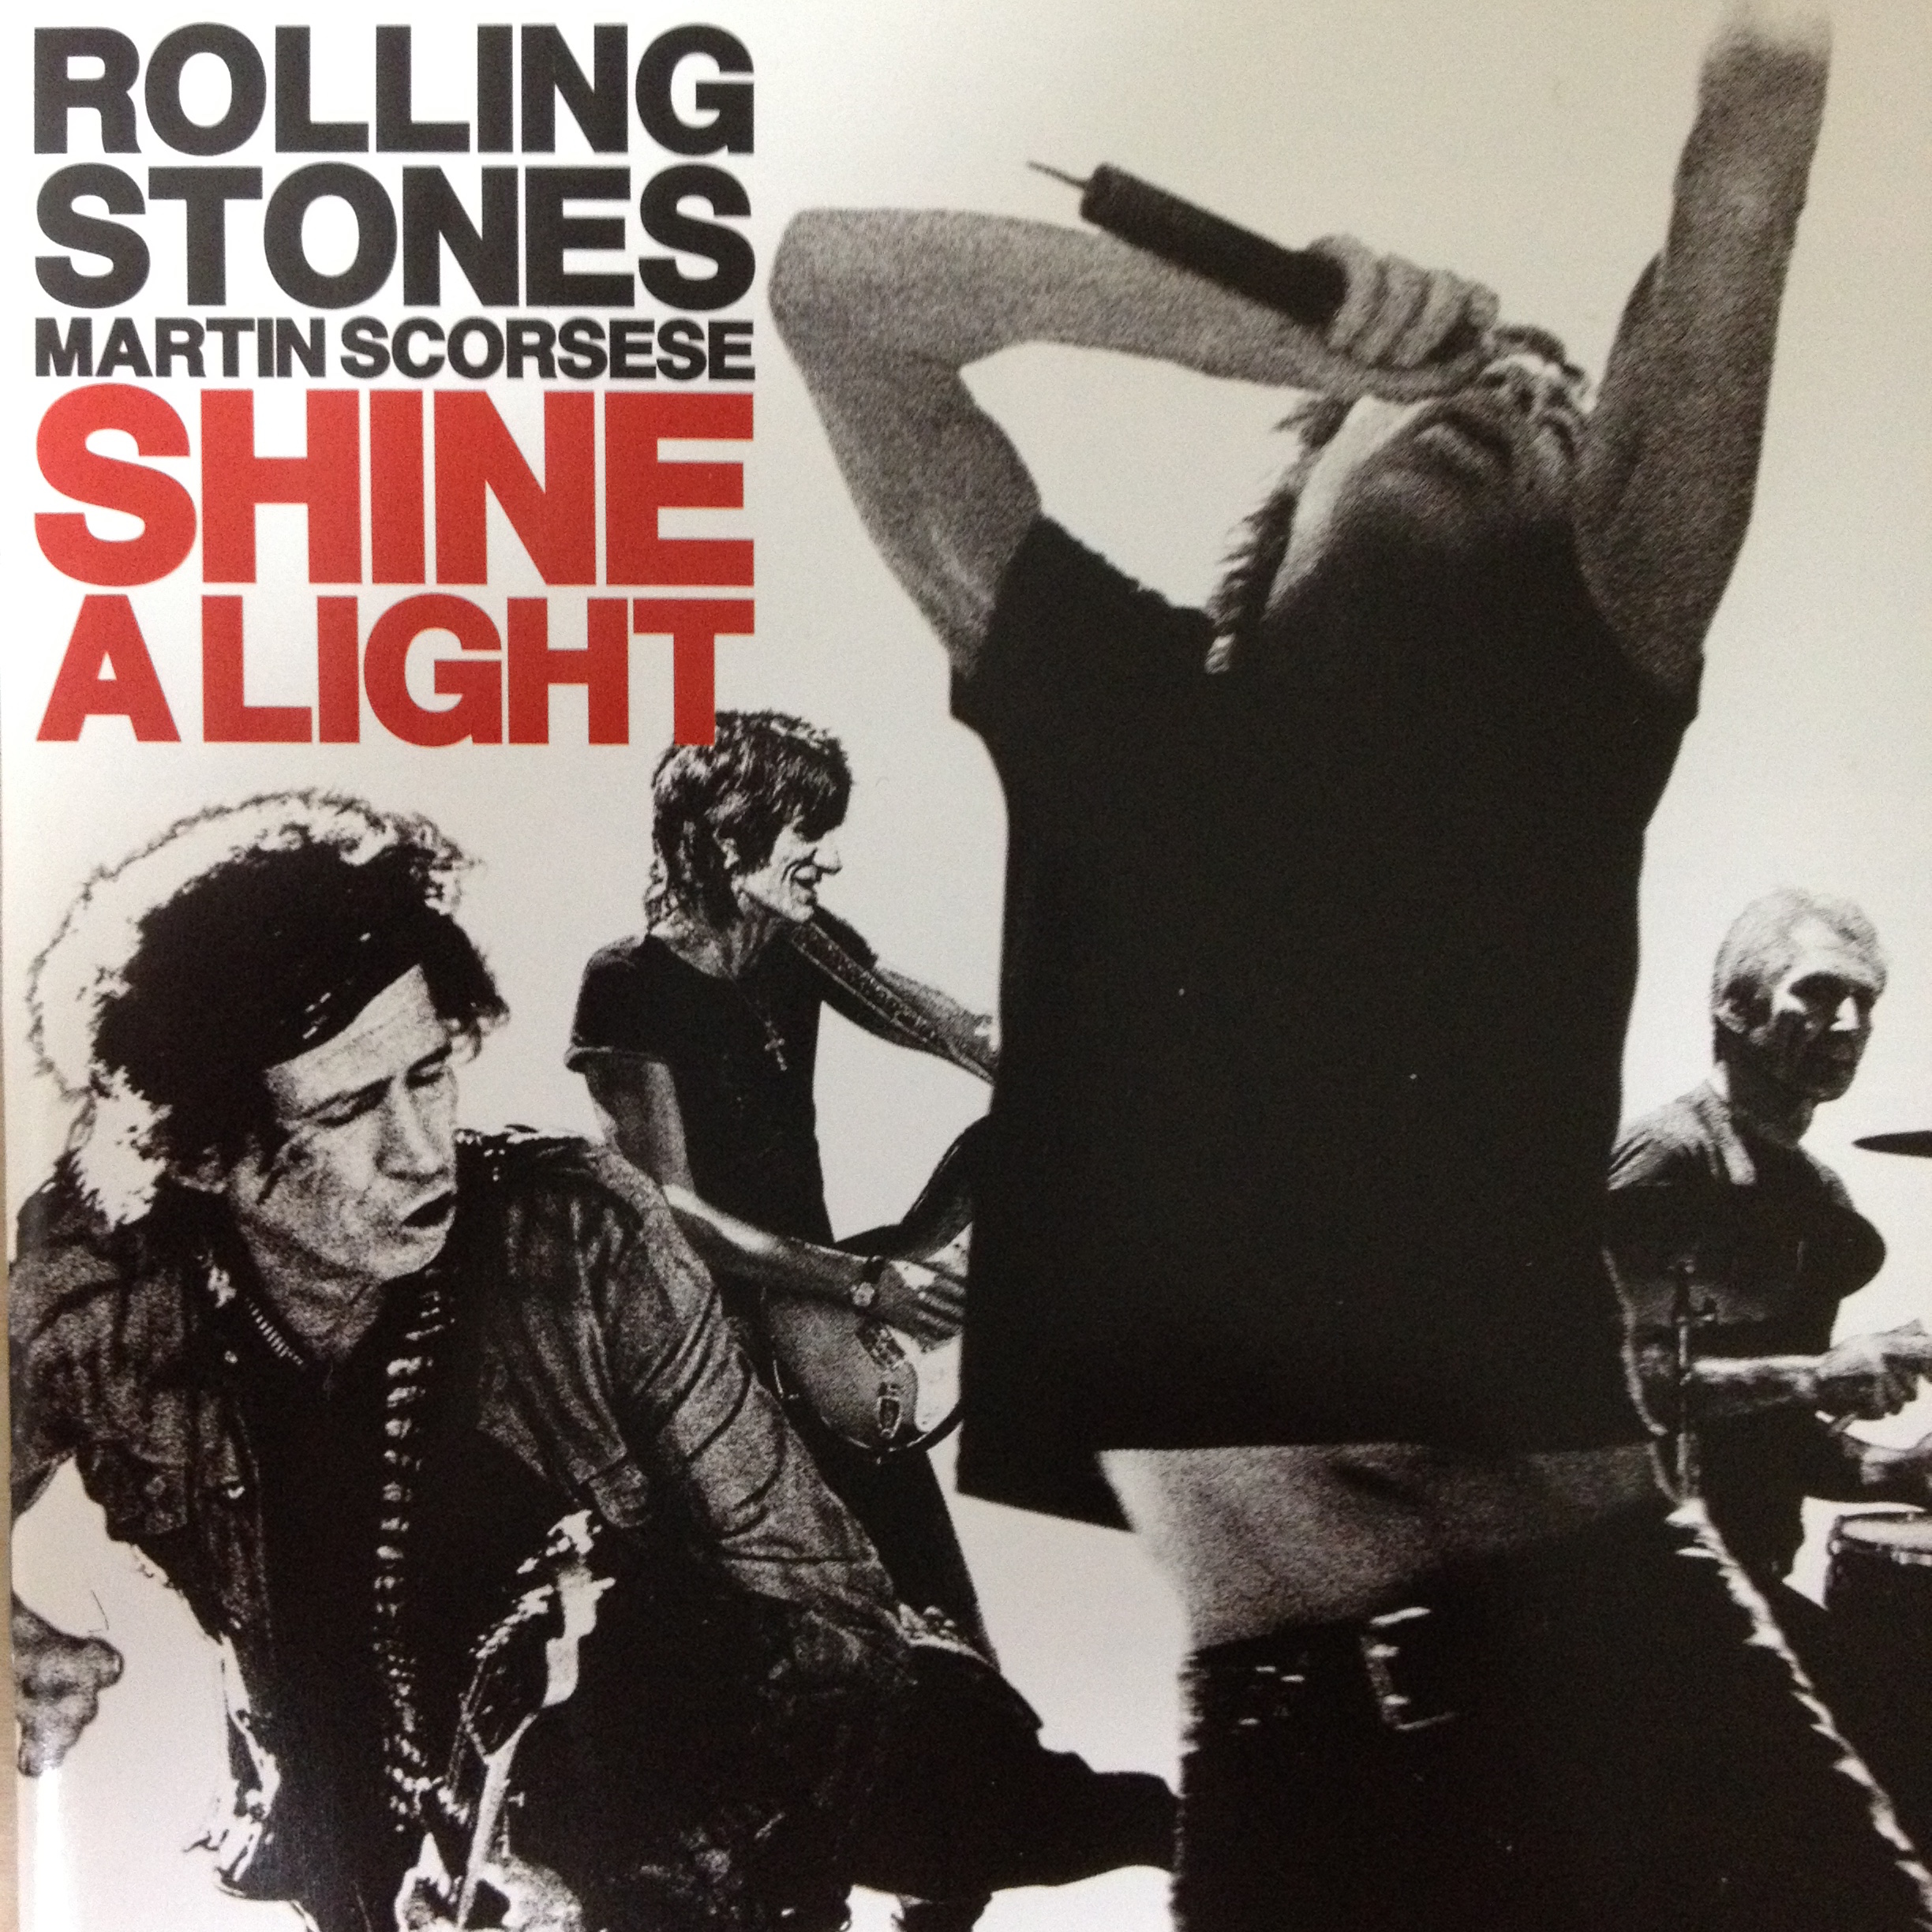 THE ROLLING STONES 「ONE MORE SHOT」